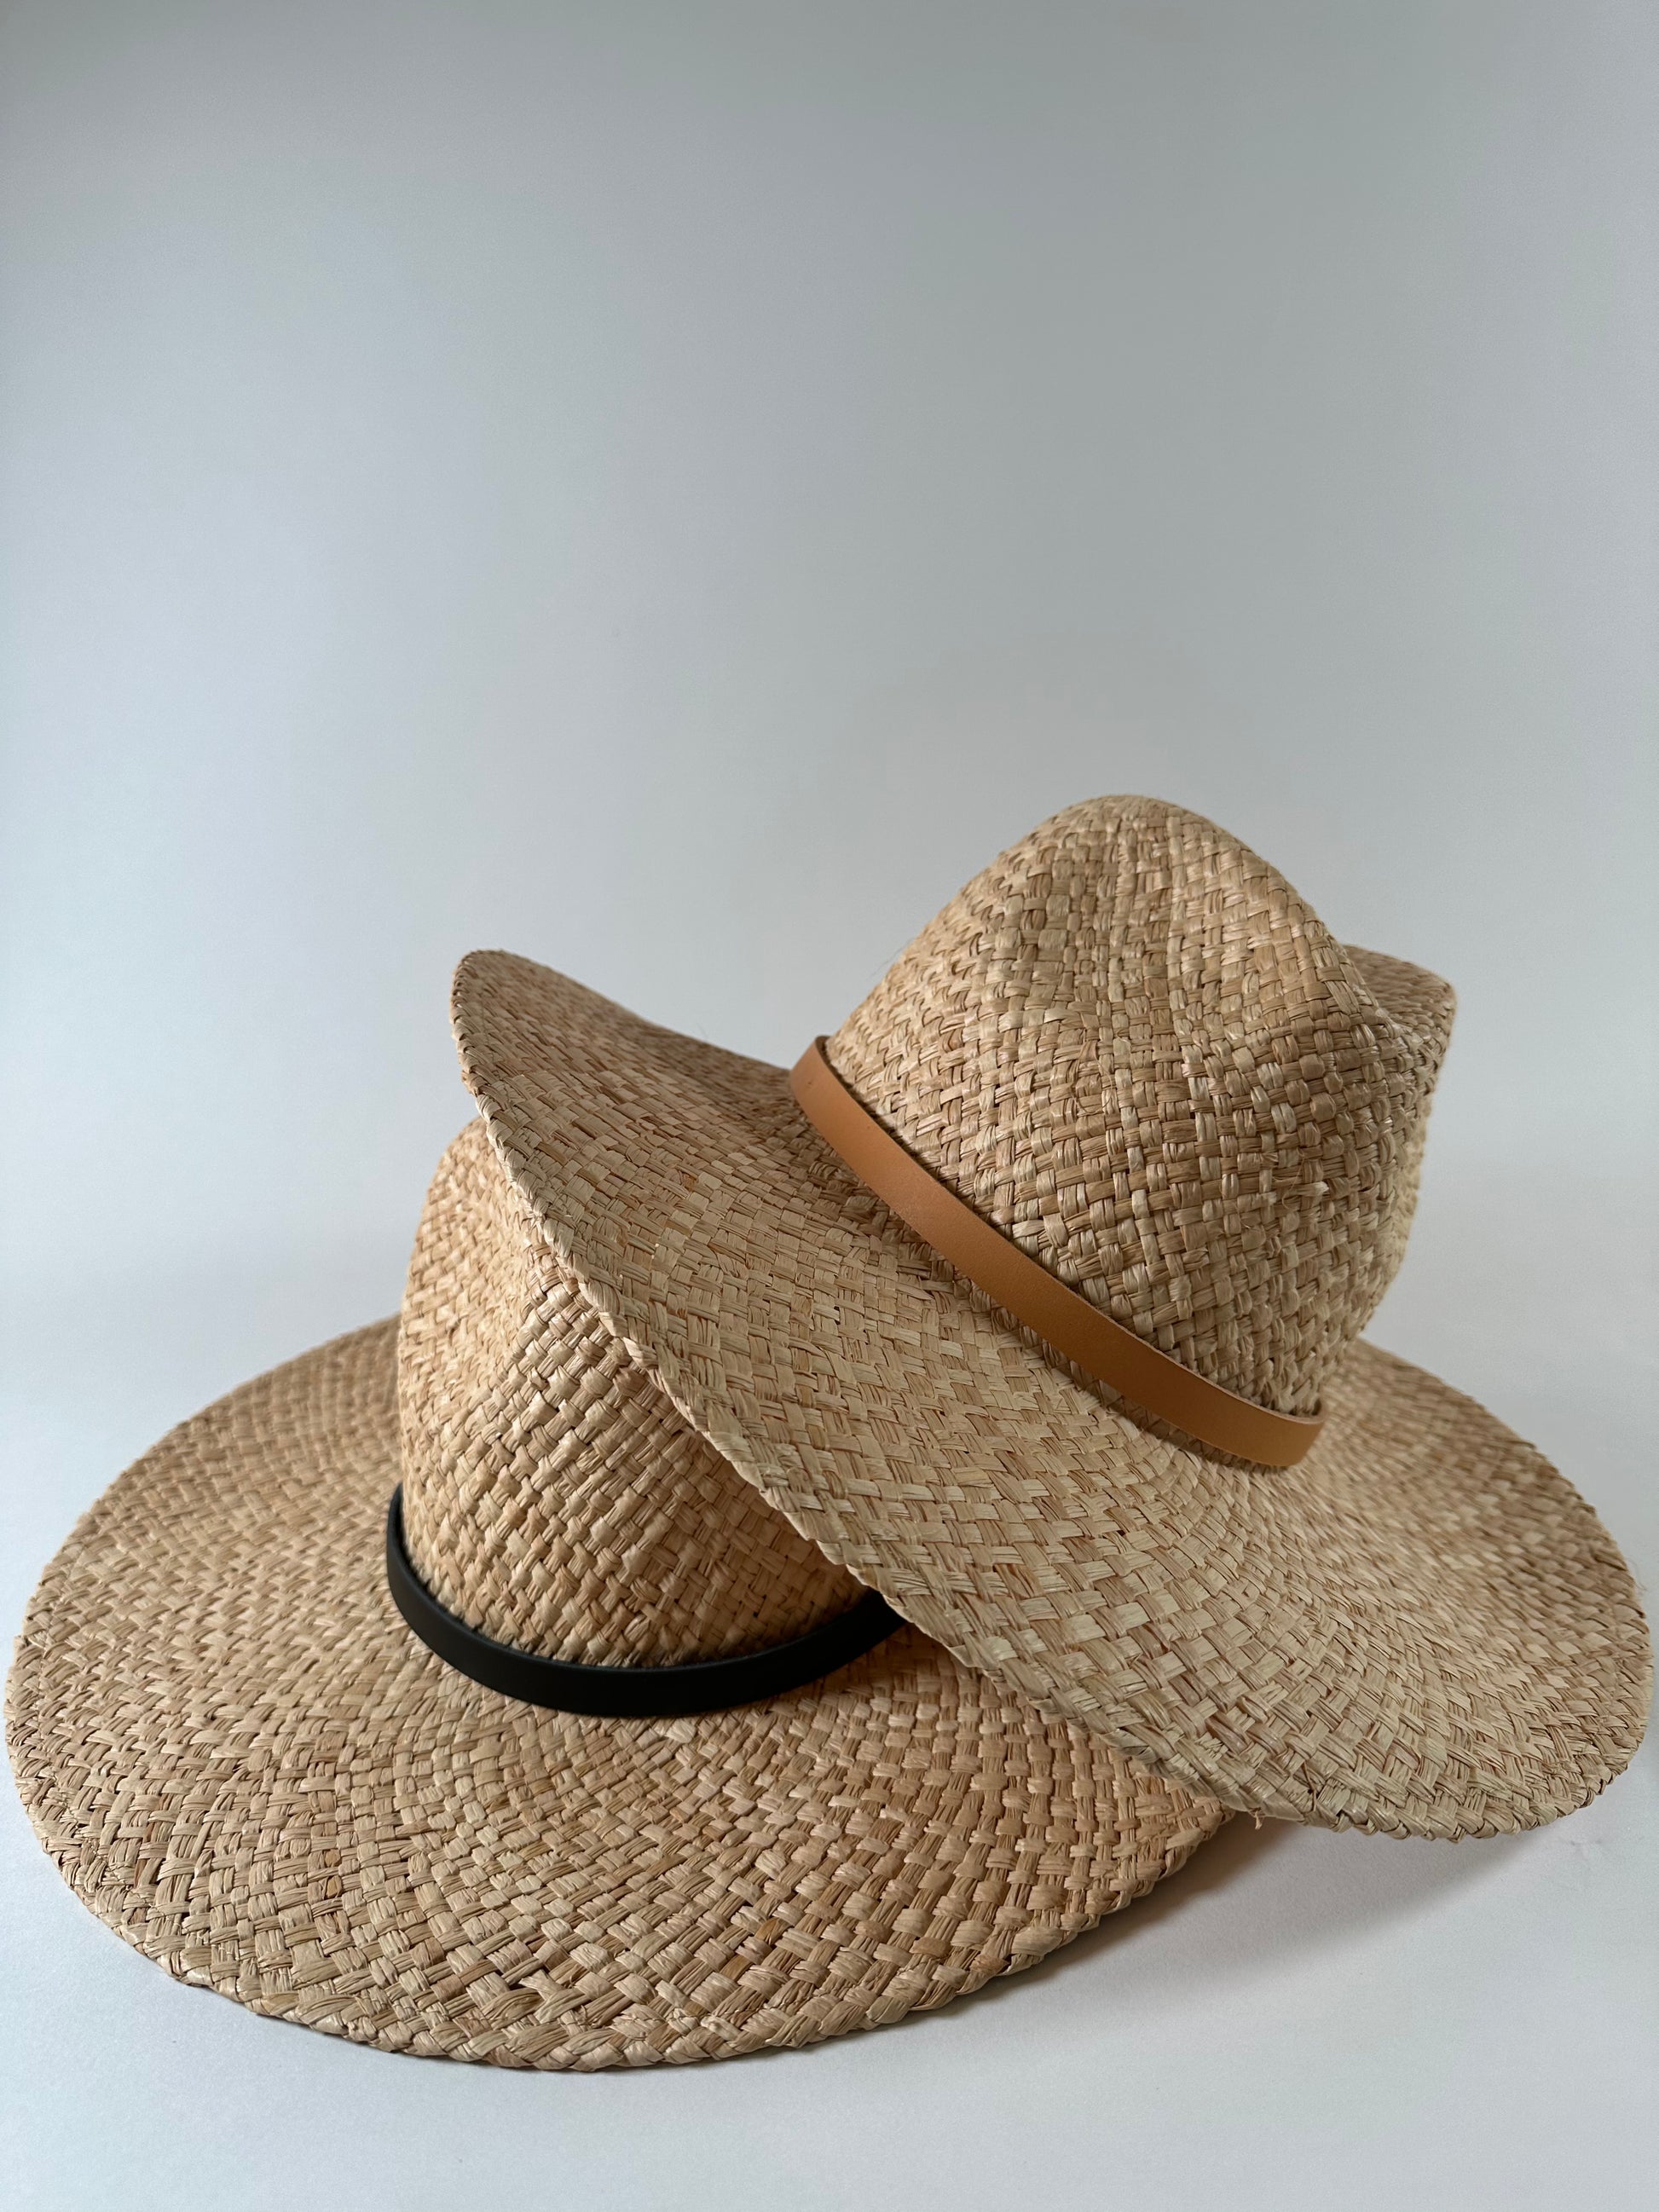 Stack of new Straw panama hats with leather bands, one tan on black. 